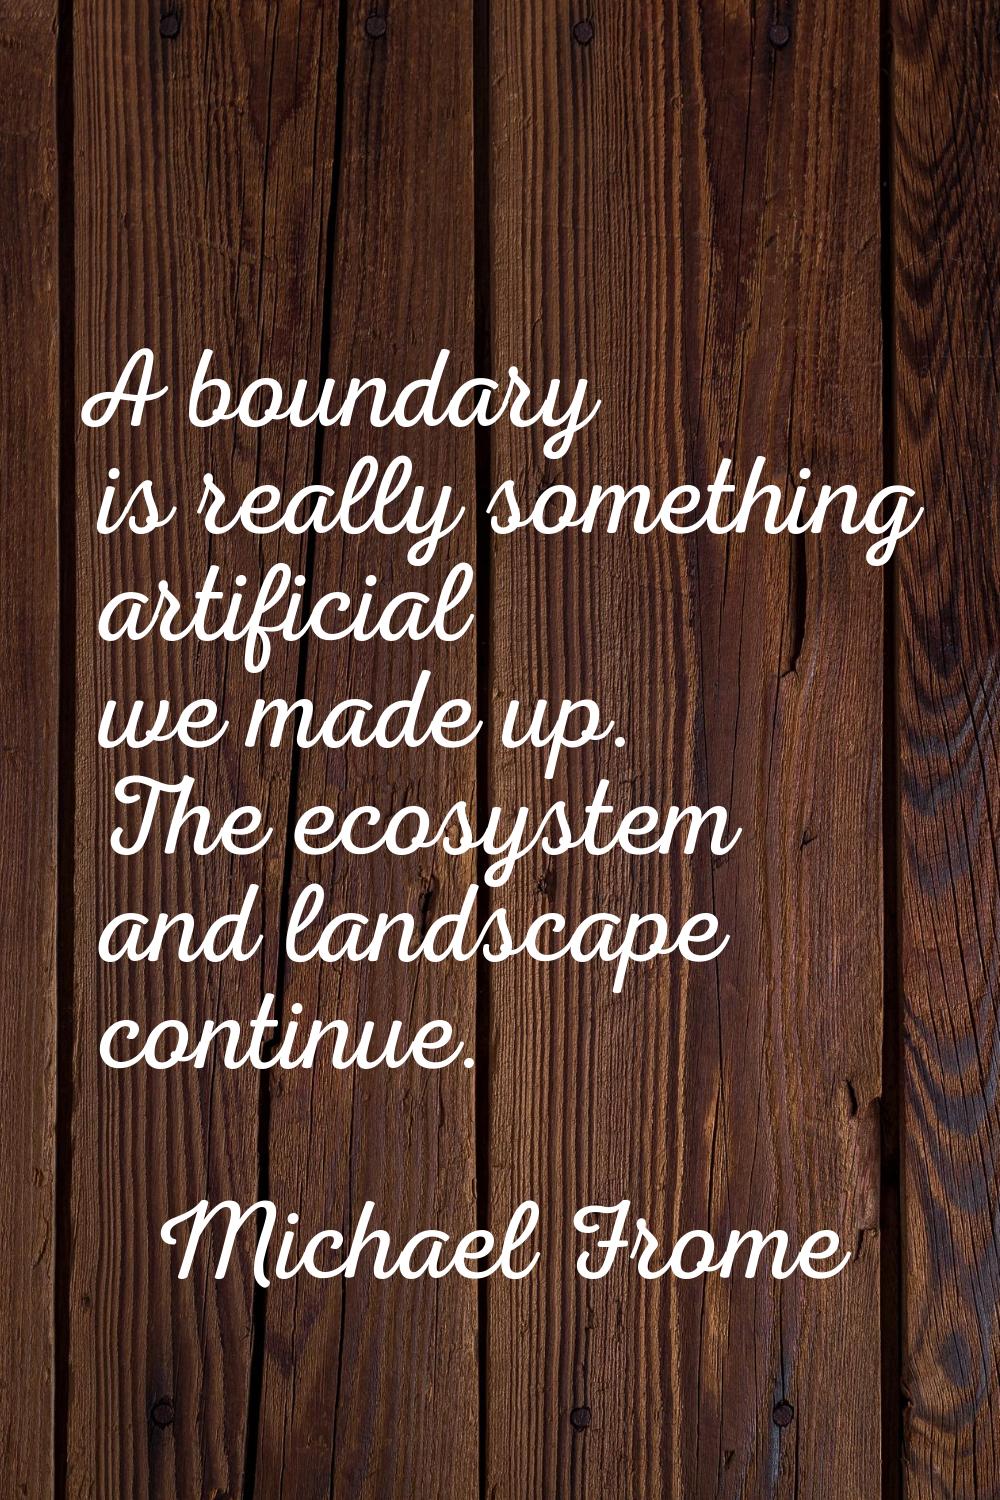 A boundary is really something artificial we made up. The ecosystem and landscape continue.